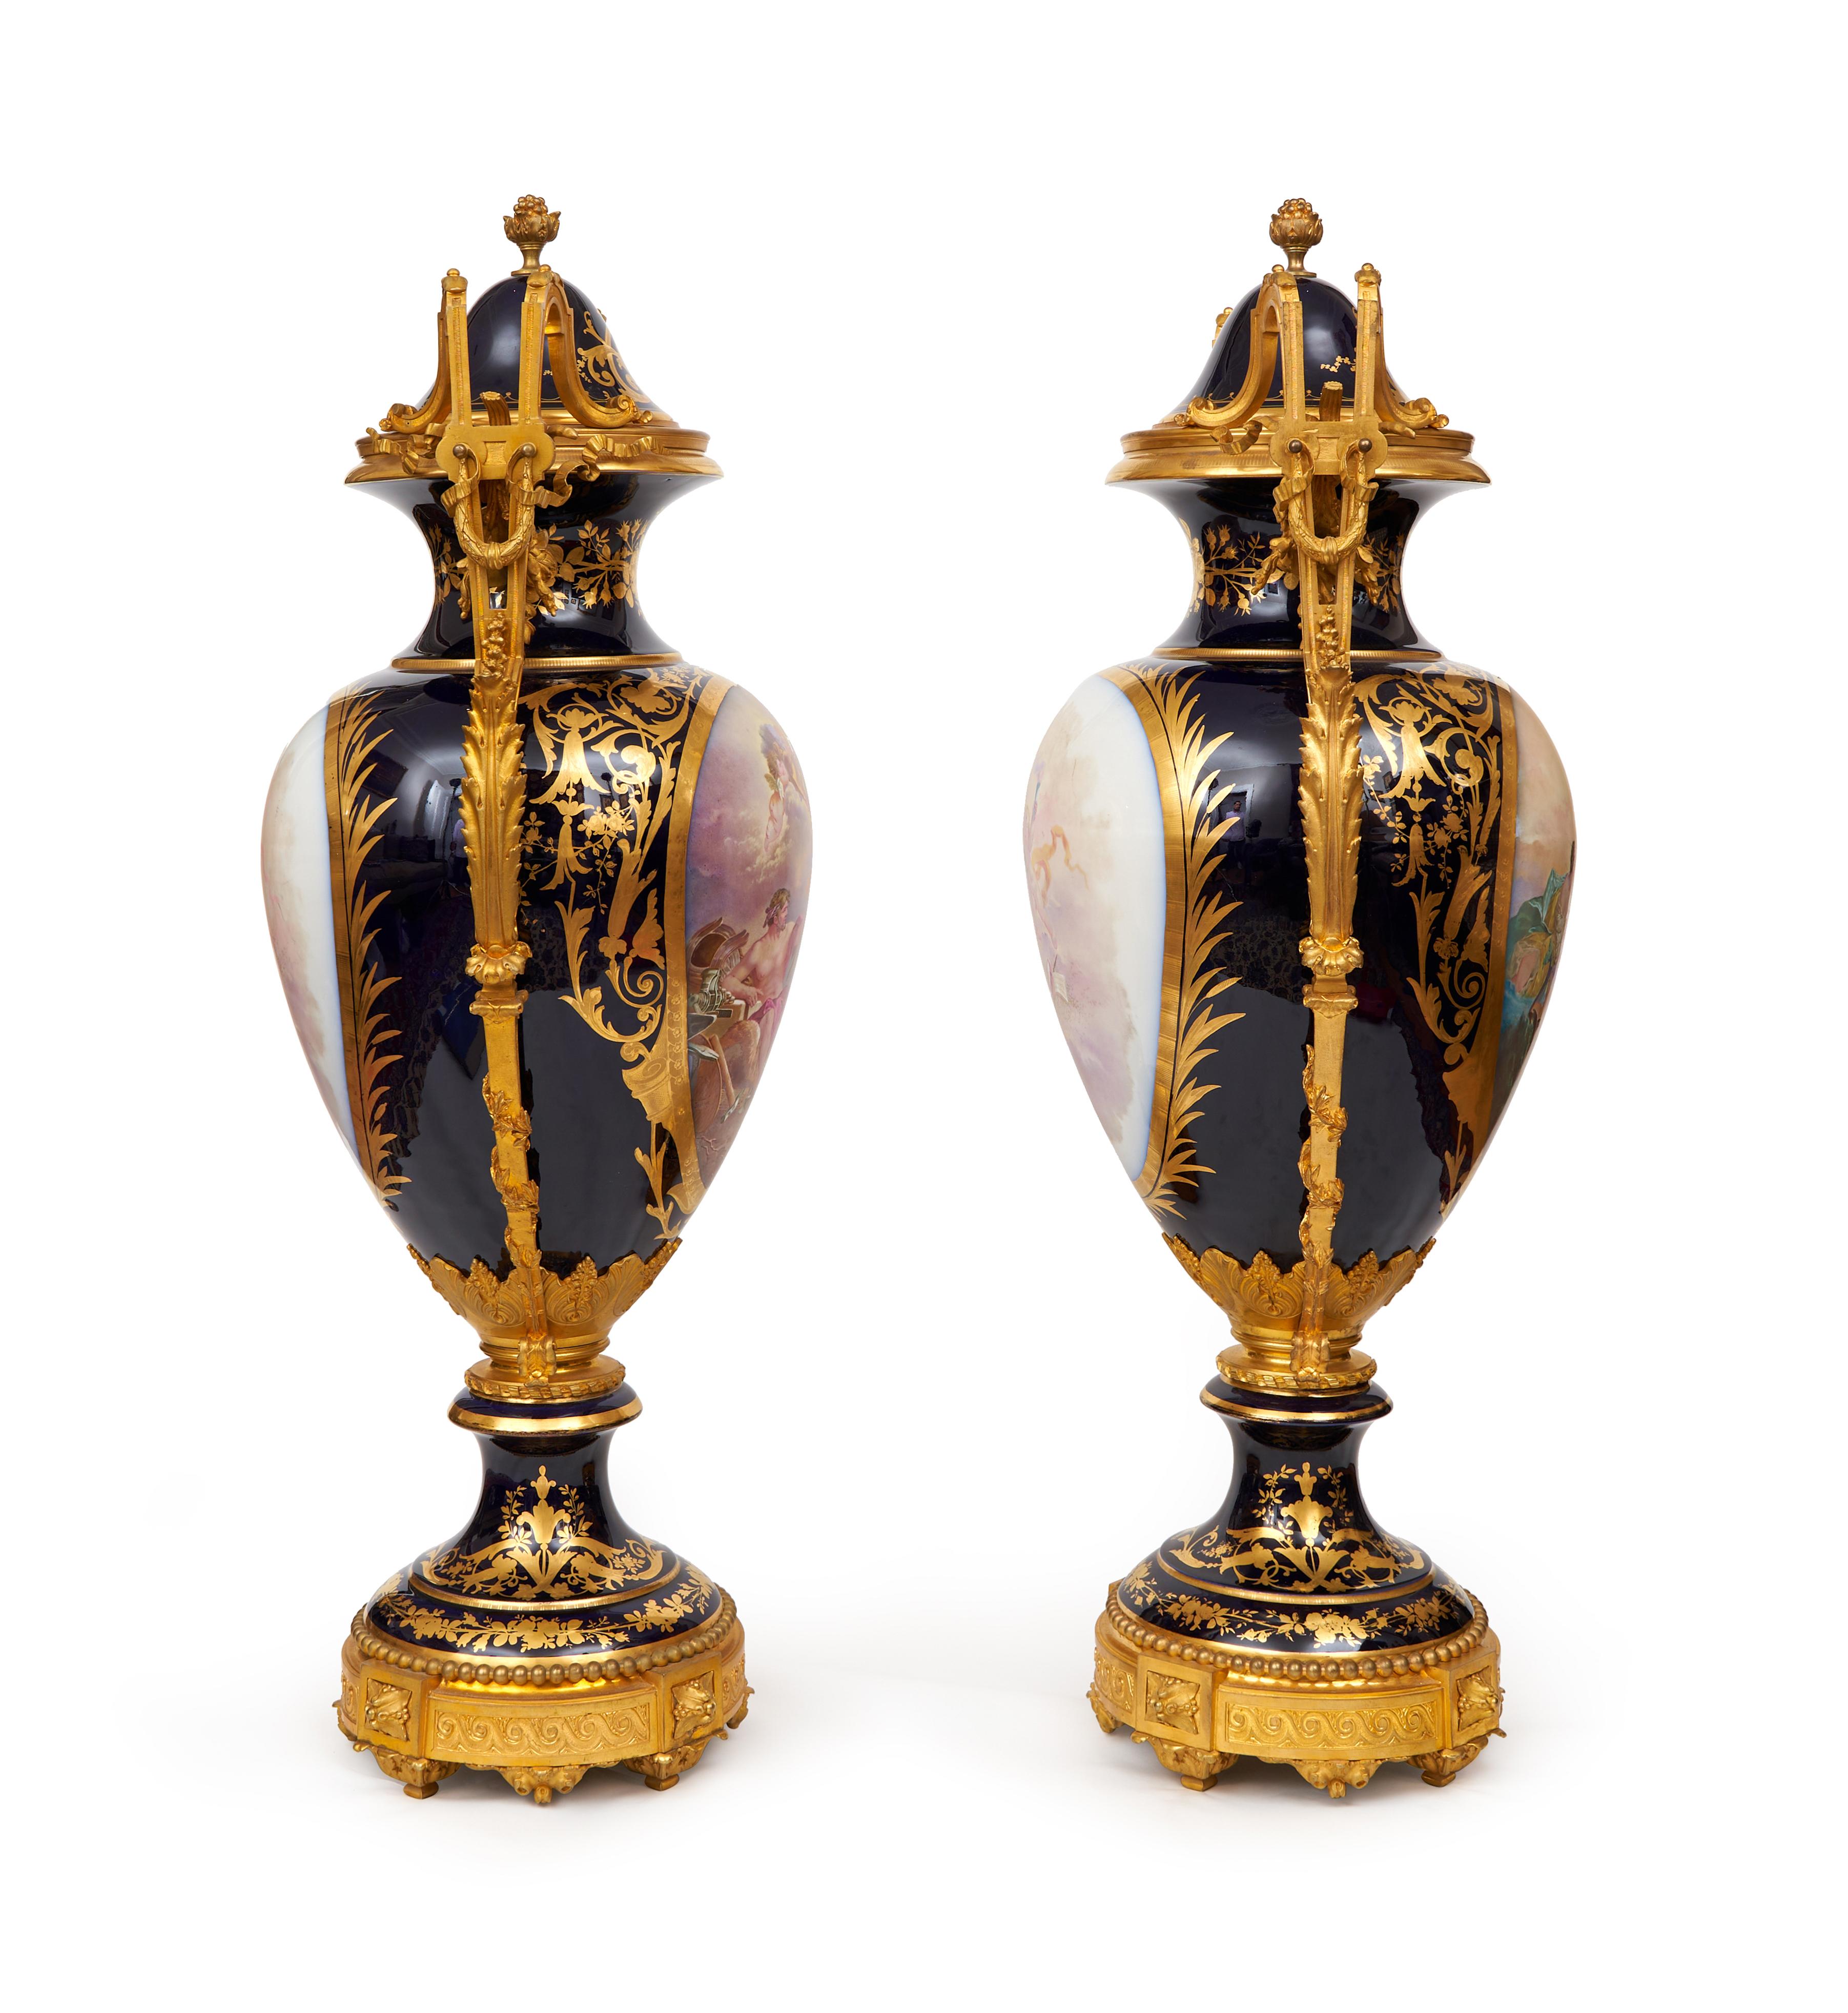 The large lidded urns each with a pair of ormolu scrolling handles, the domed covers marked with a Sevres mark to the underside, the porcelain signed 'Jocelyn', depicting classical scenes of gods and goddesses on a cobalt blue ground with gilt